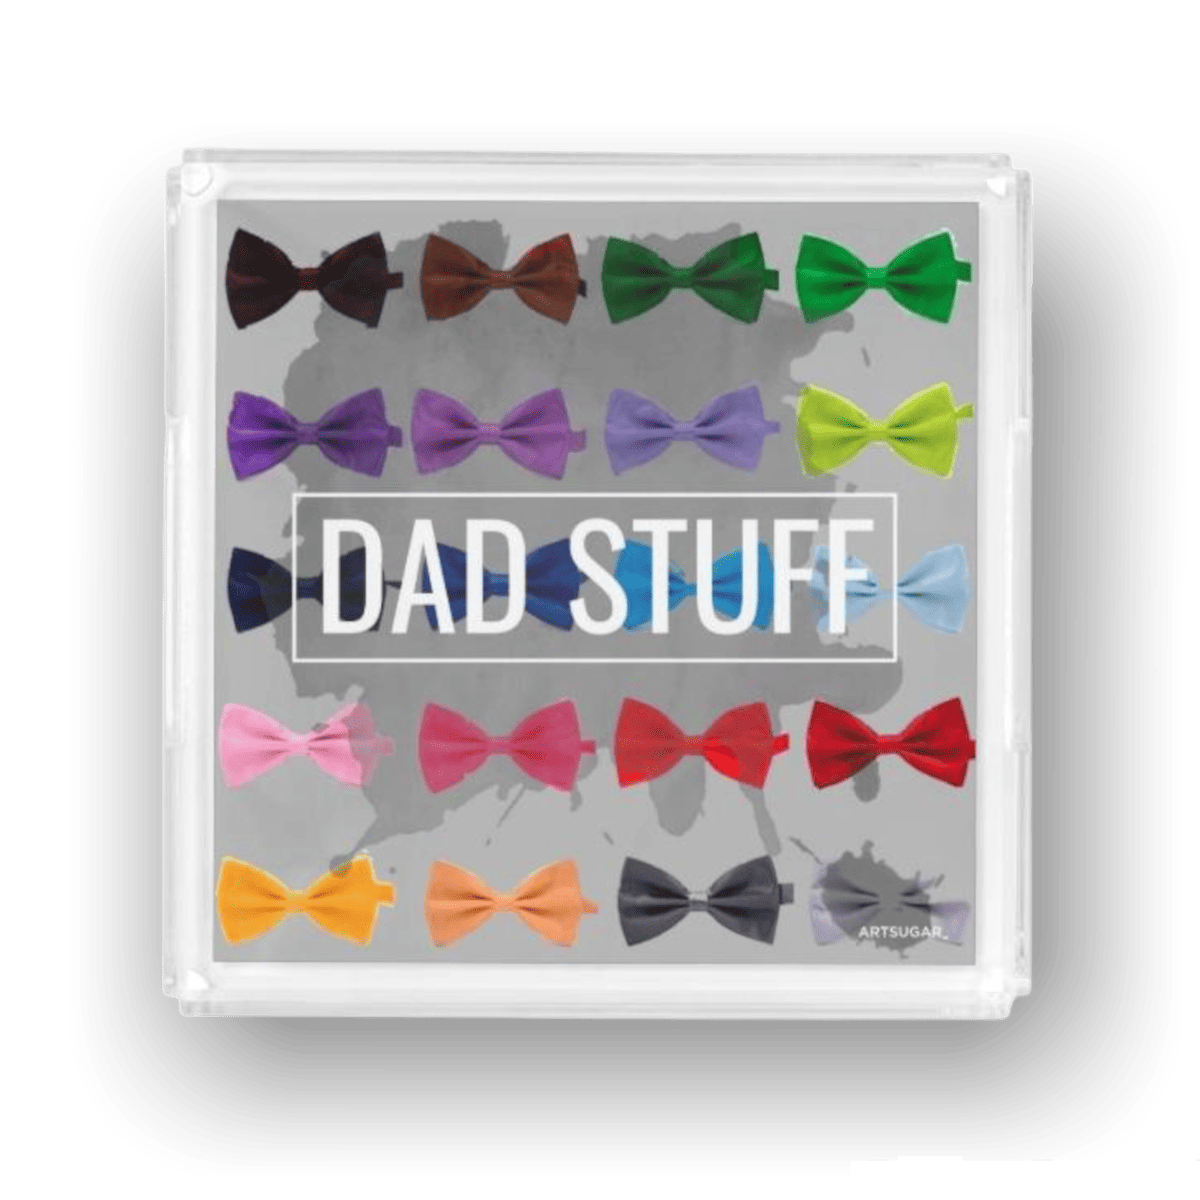 25 Best Gifts For Dad For Father’s Day Under 0￼